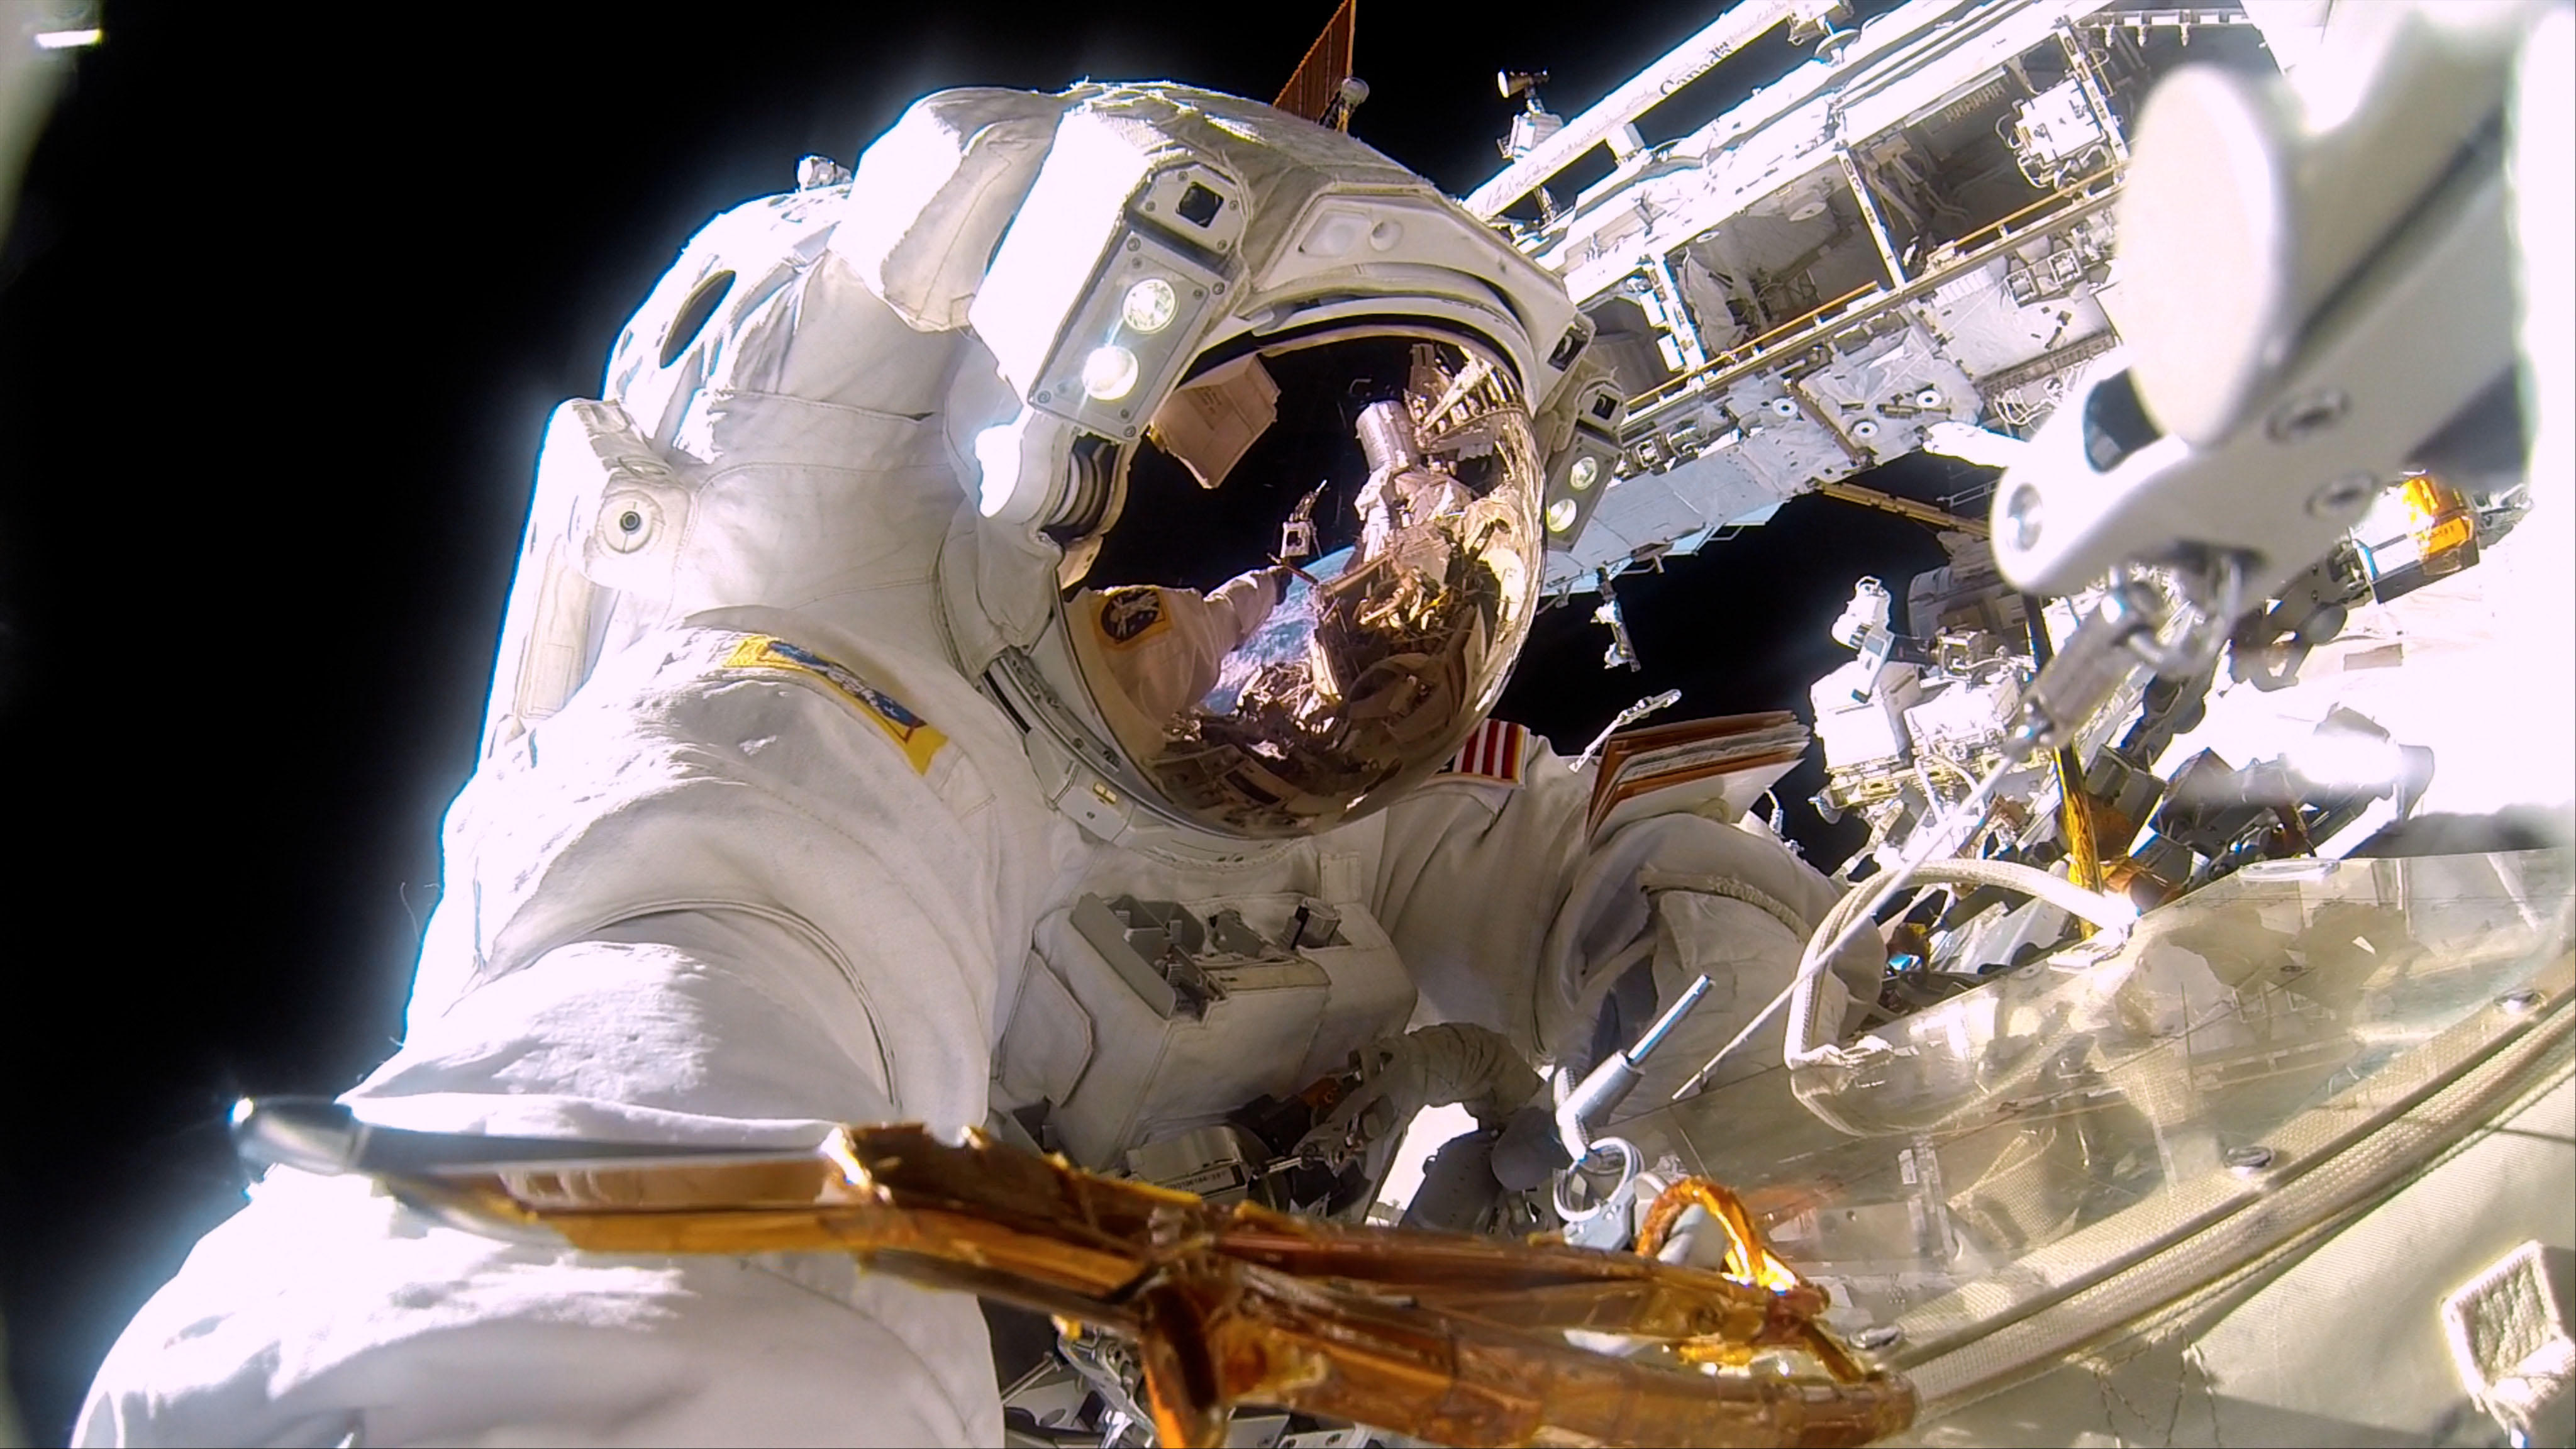 A NASA astronaut on a spacewalk to repair the exterior of the International Space Station. It’s almost 300° on the sun side of the space station and -275° in the shade.